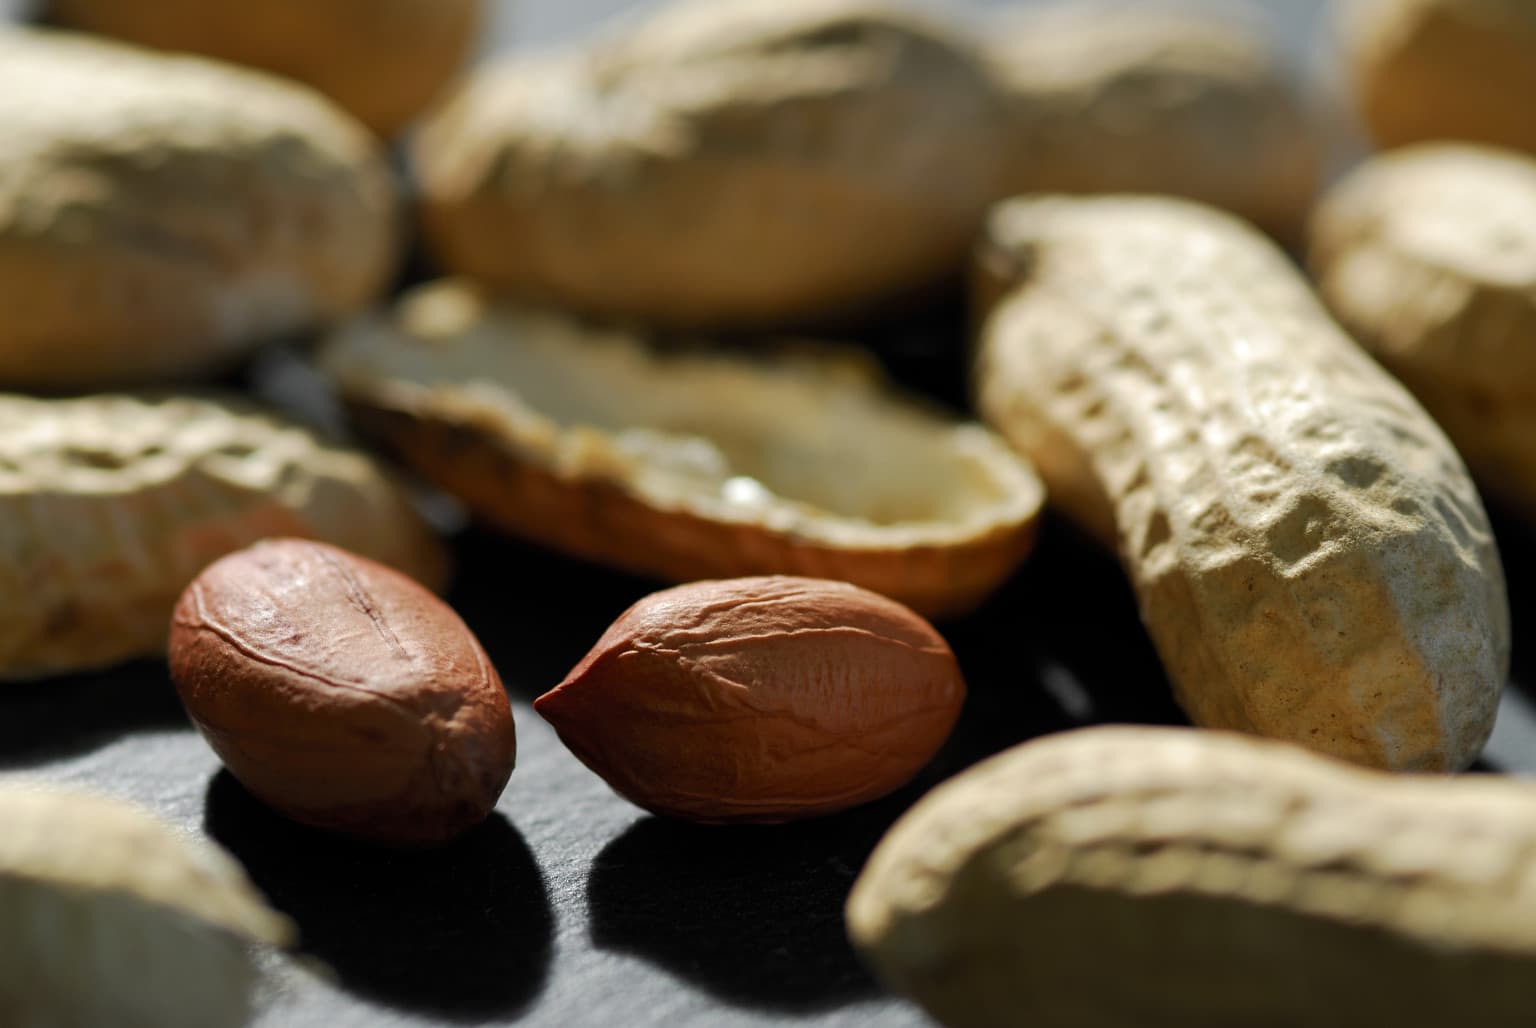 What You Need To Know About New Peanut Allergy Guidelines